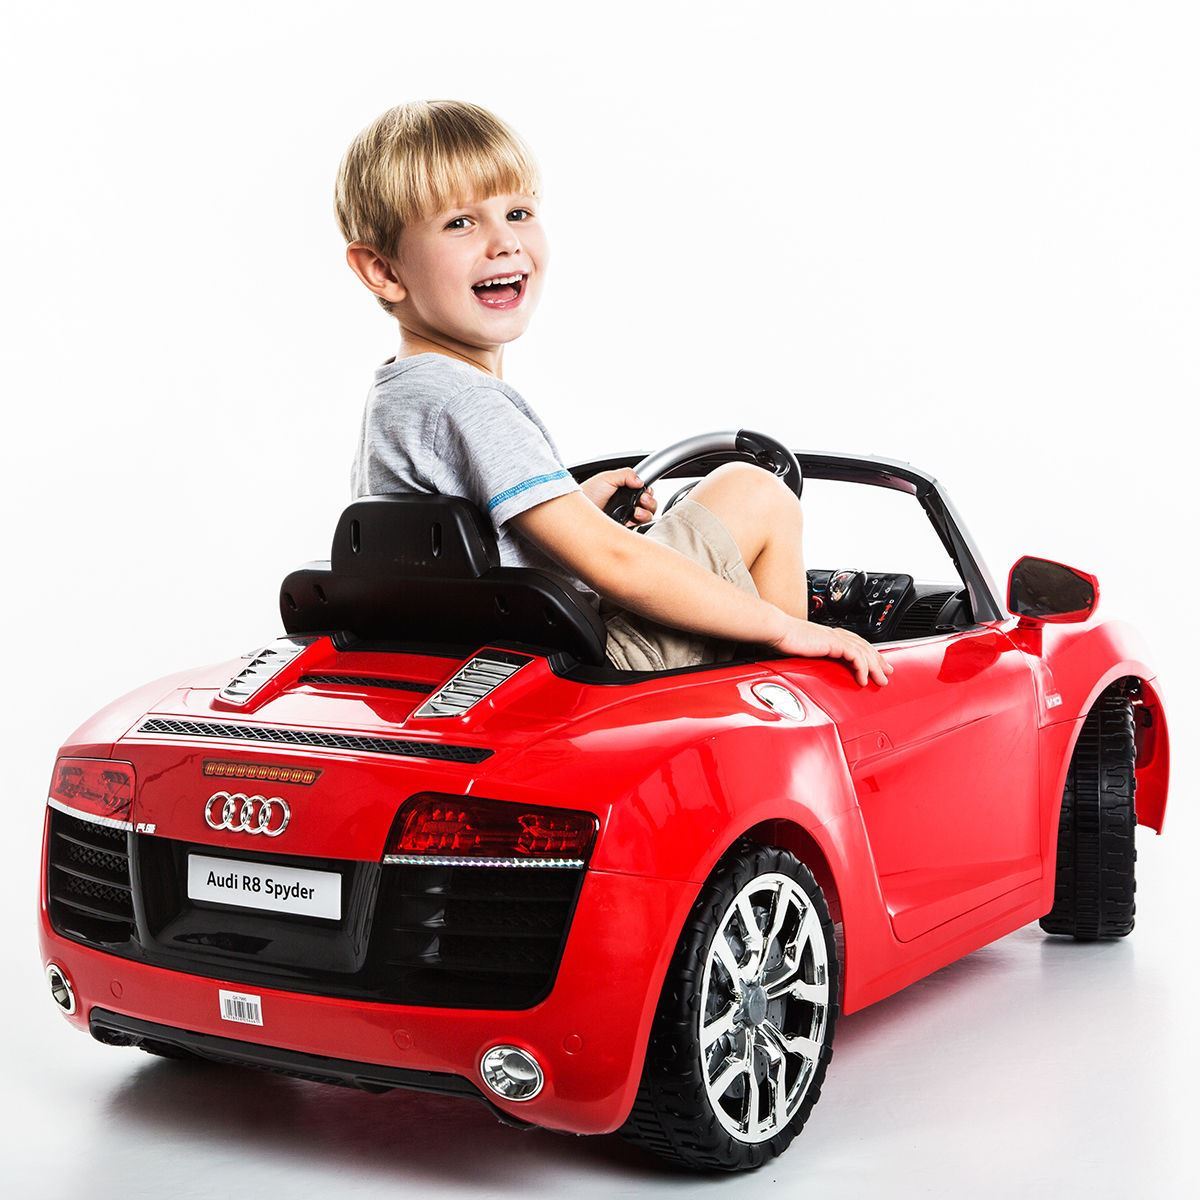 Kids Ride On Audi R8 Spyder 12v Kids Mp3 Rc With Remote Control - Red